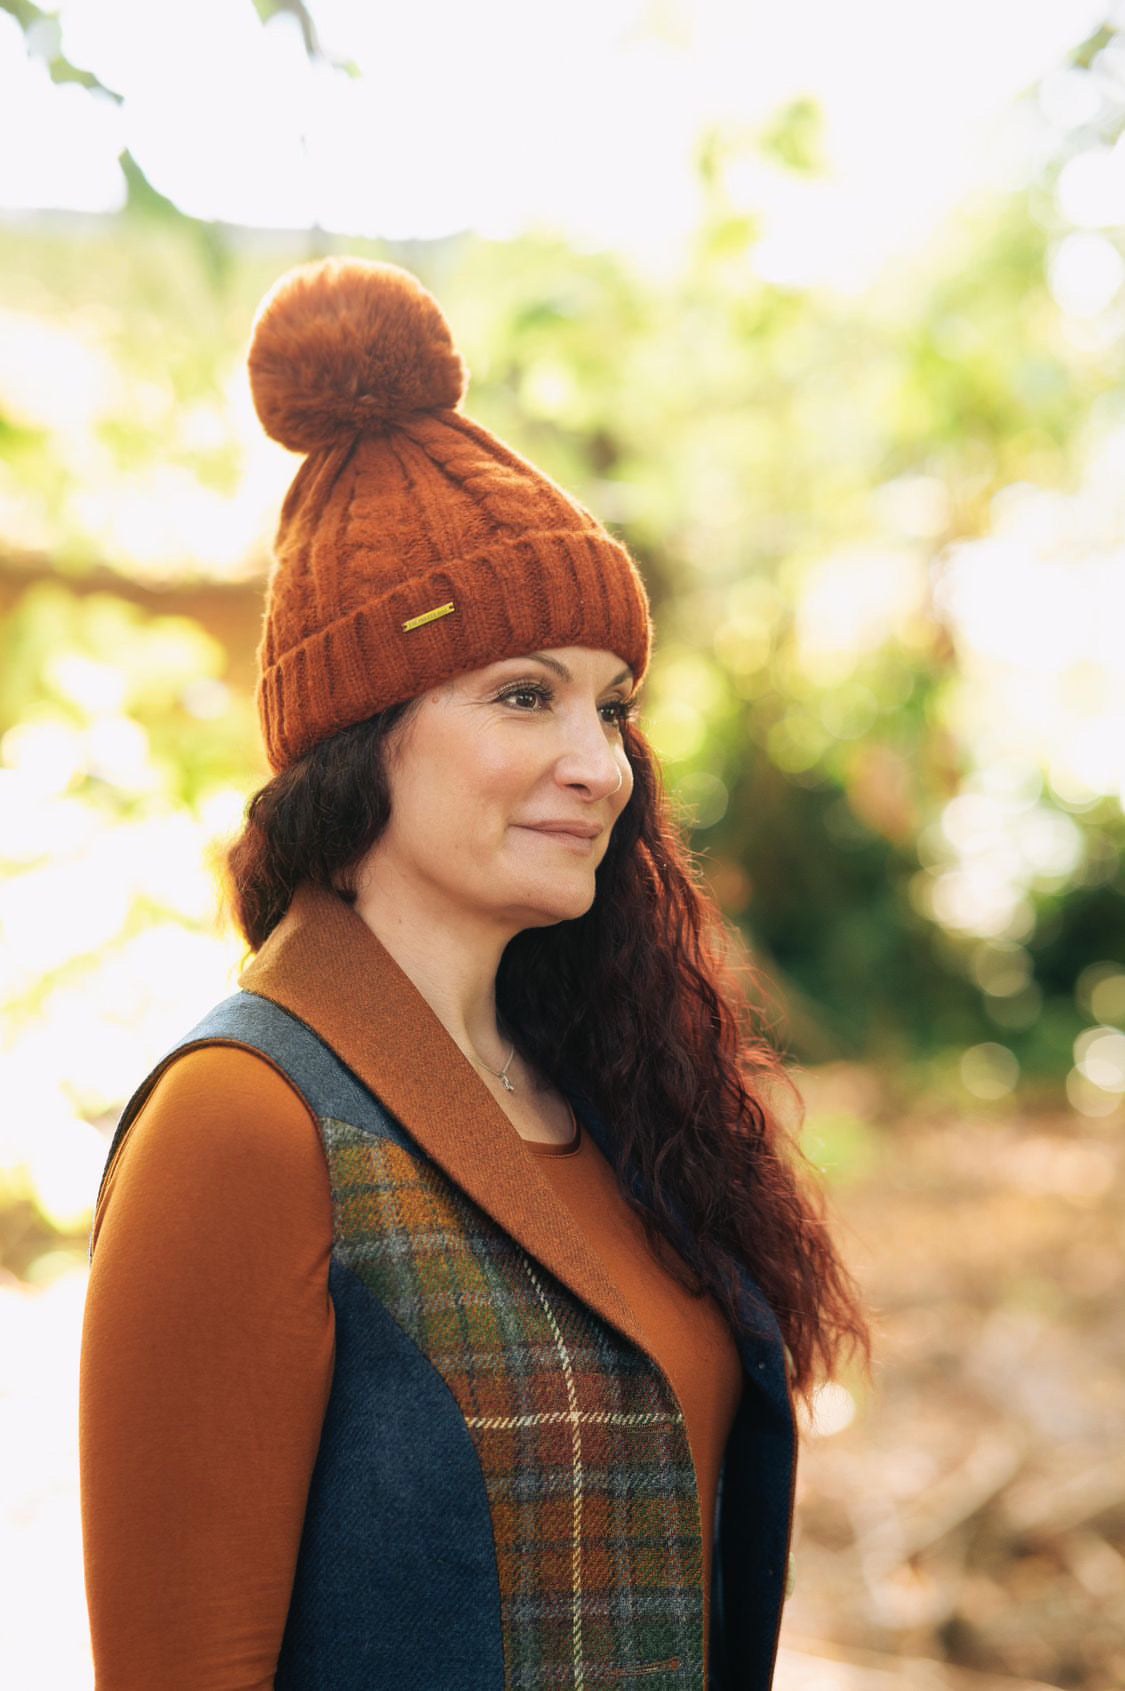 Laura Satin Lined Beanie With Detachable Pom - Chestnut Brown - The Pretty Hat